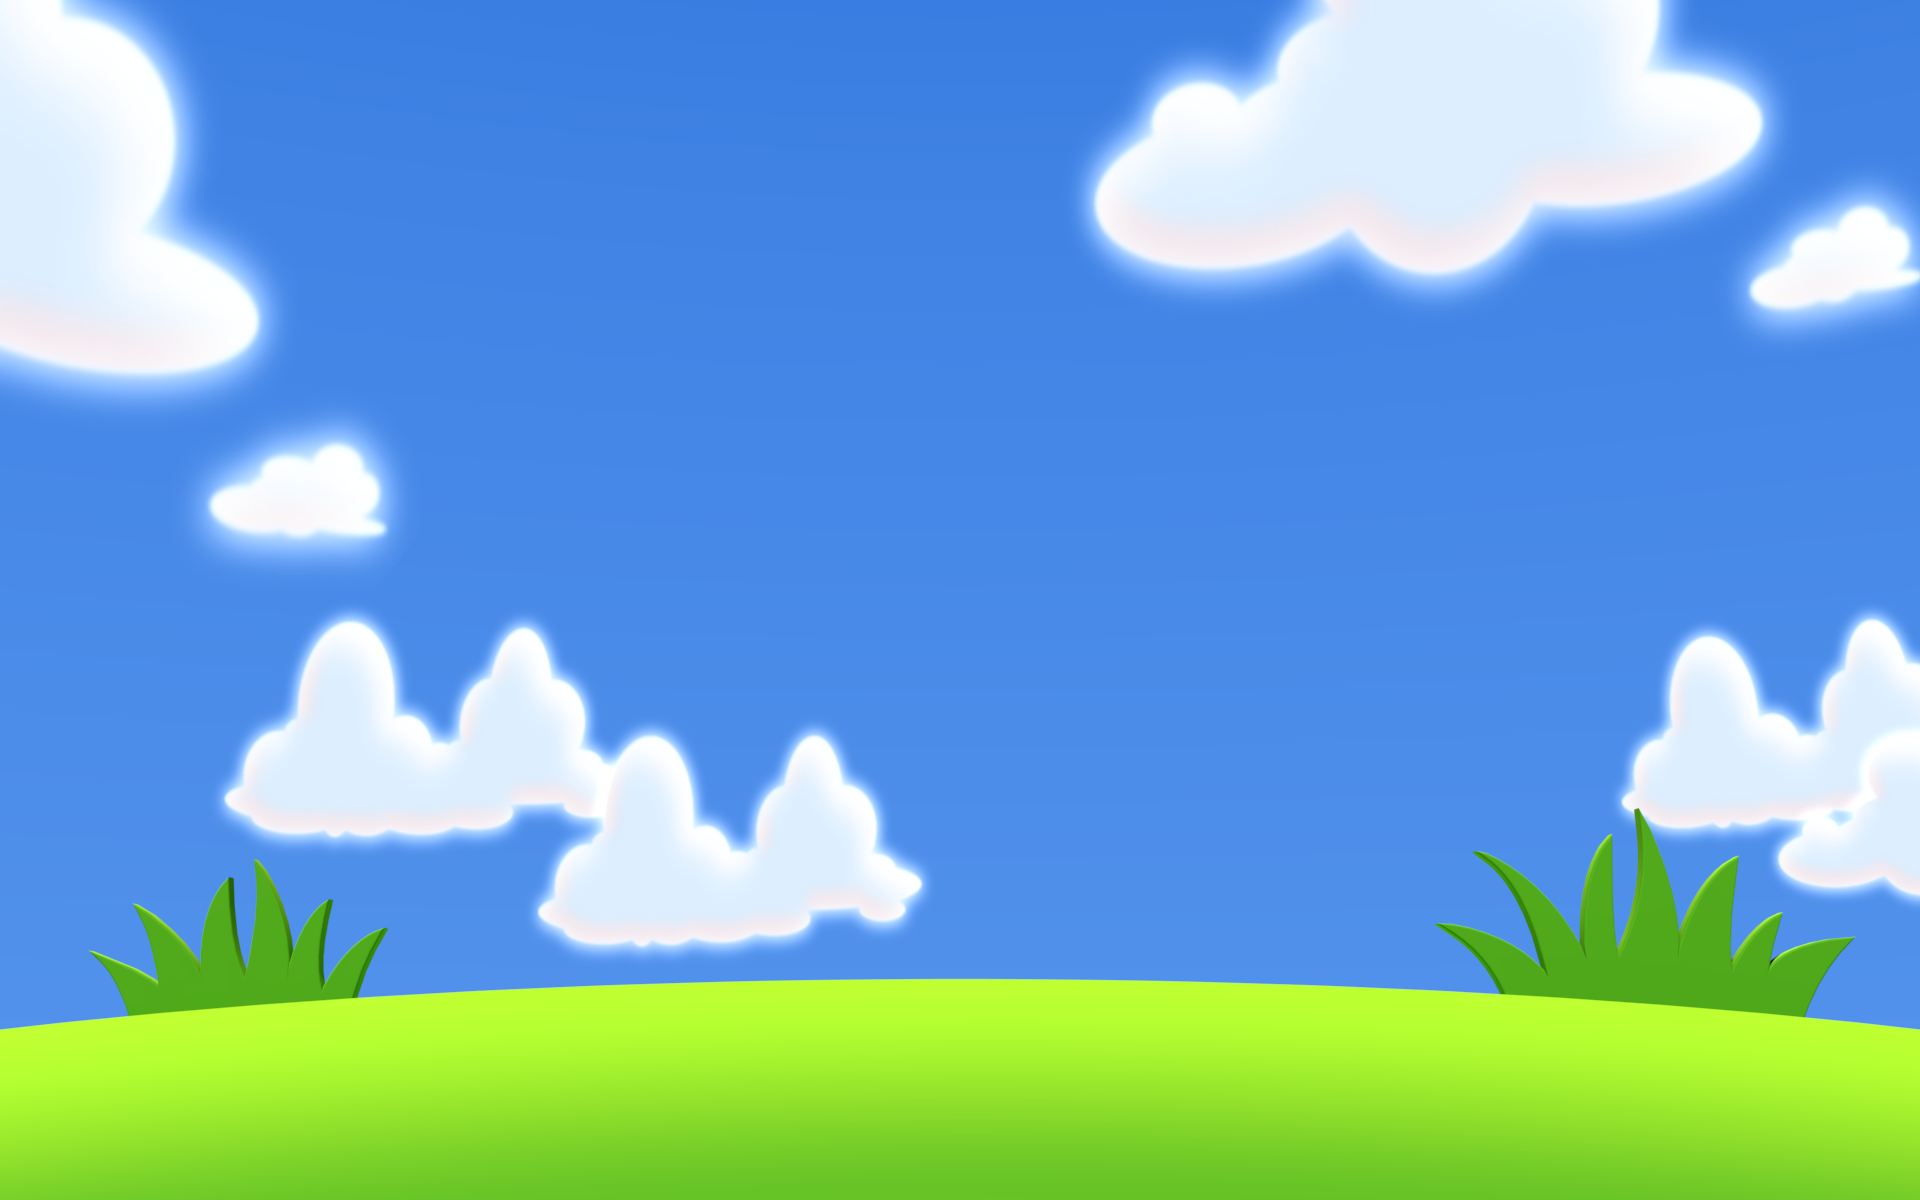 ... sky clipart · Clipart background is ideal for Web design. Image processing is also OK in the background ...